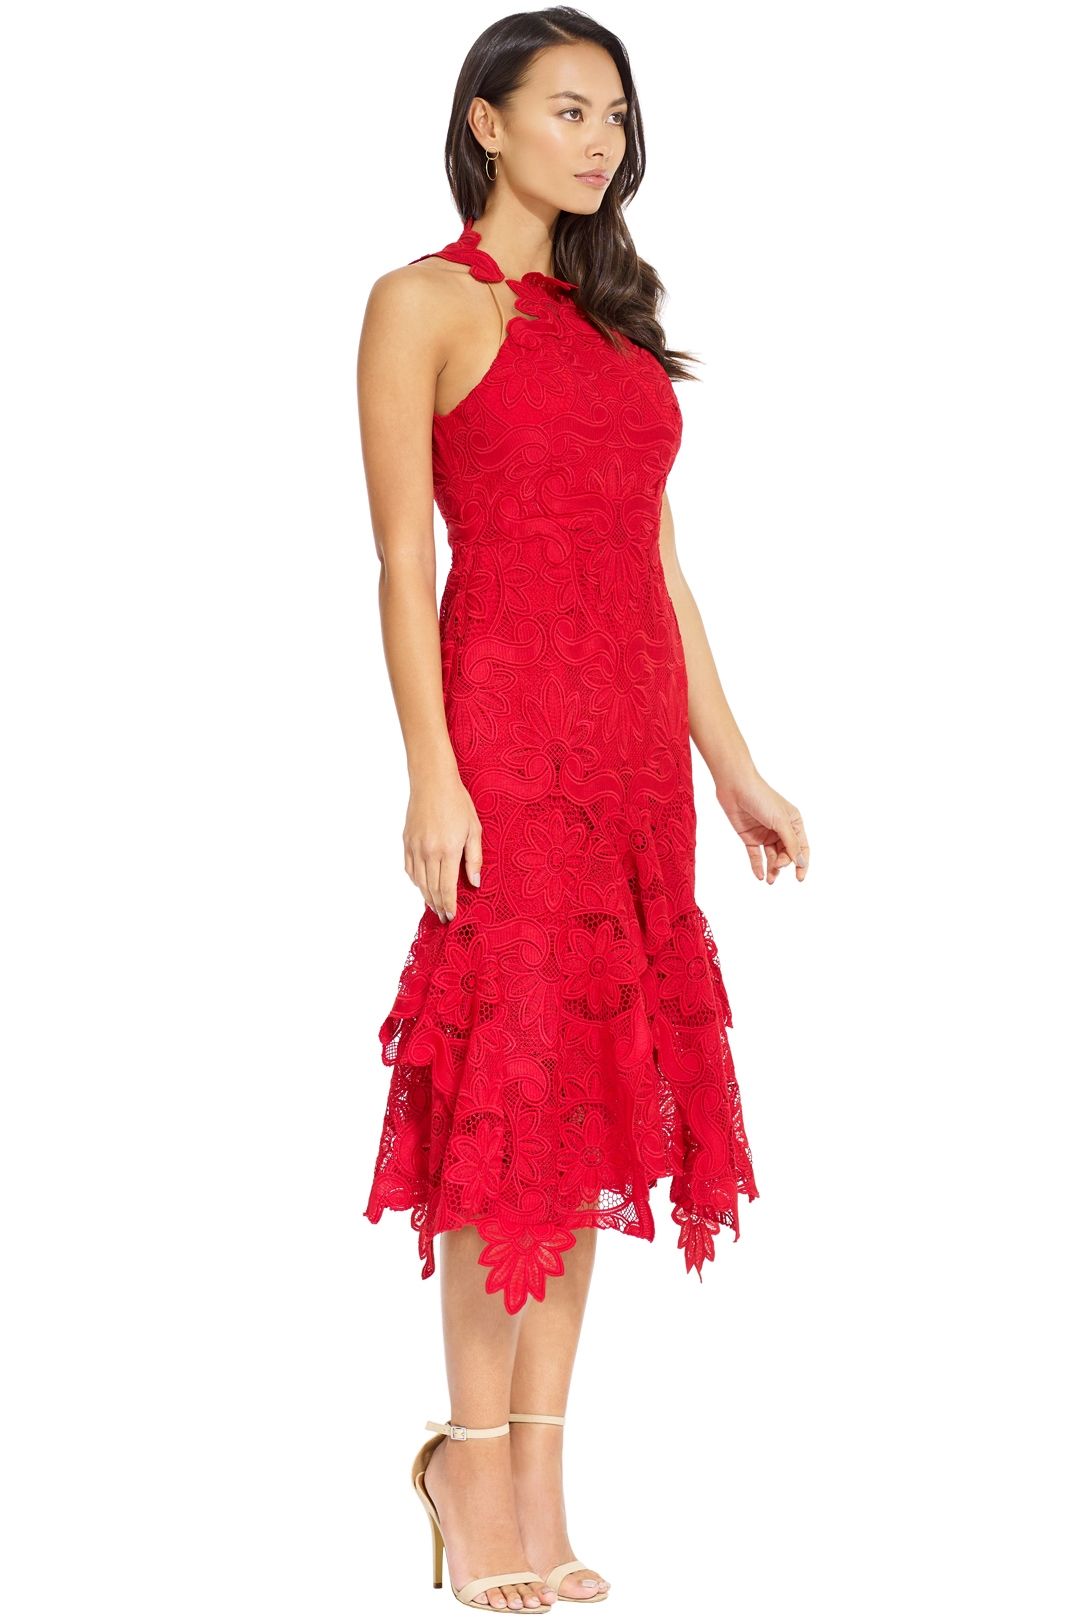 Thurley - Waterlilly Midi Dress - Red - Side